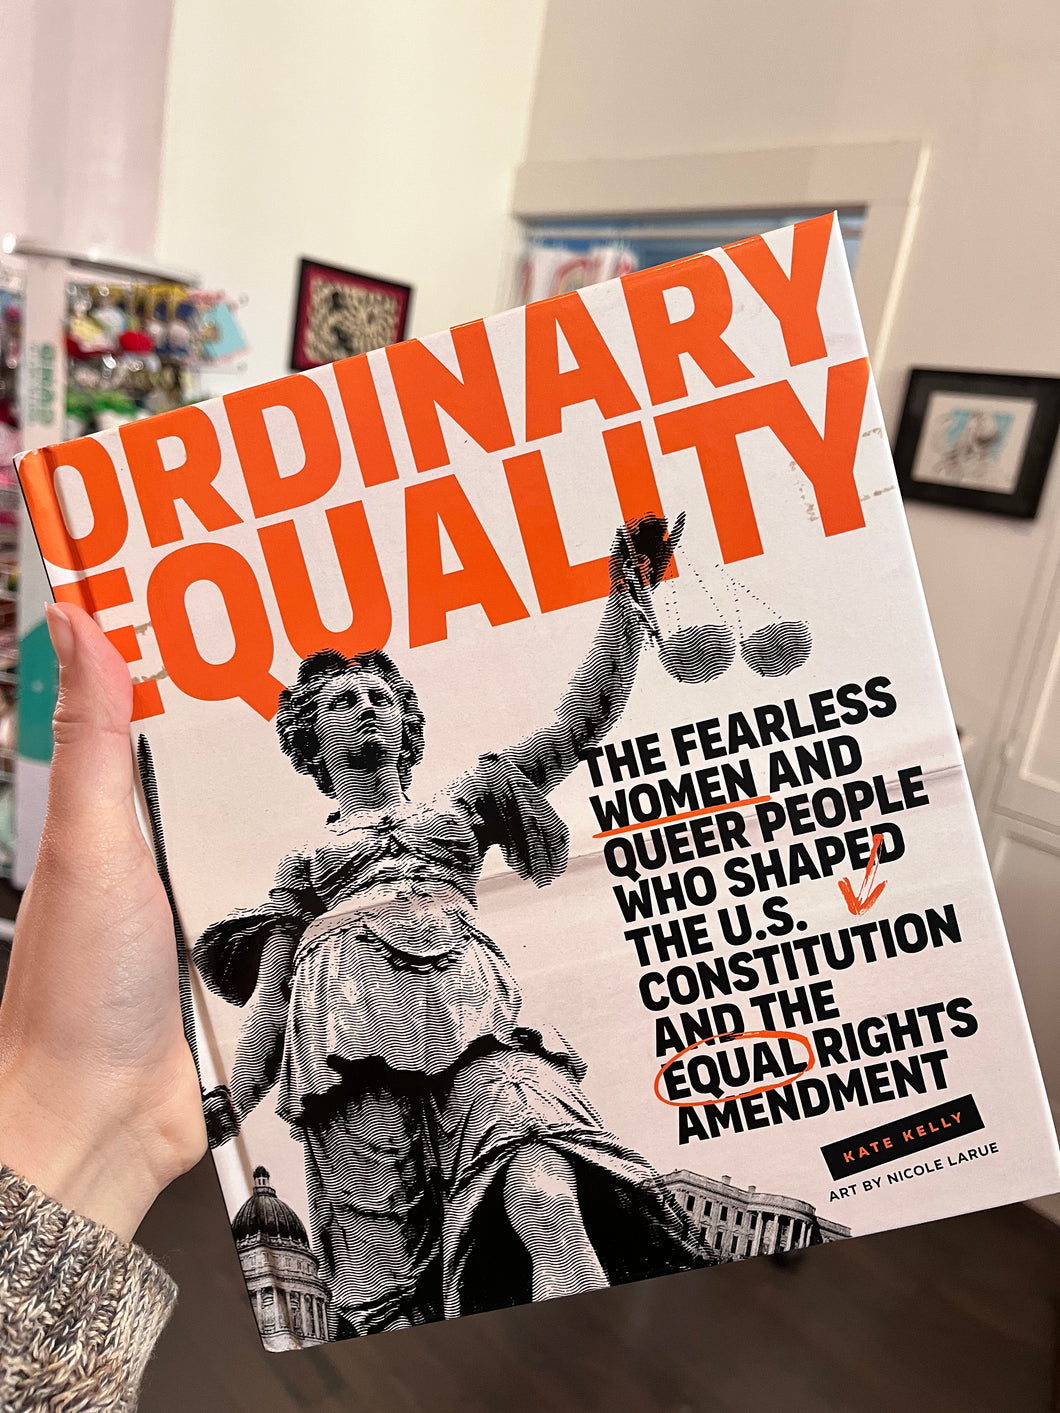 Ordinary Equality: The Fearless Women & Queer People who Shaped the US Constitution and the Equal Rights Amendment